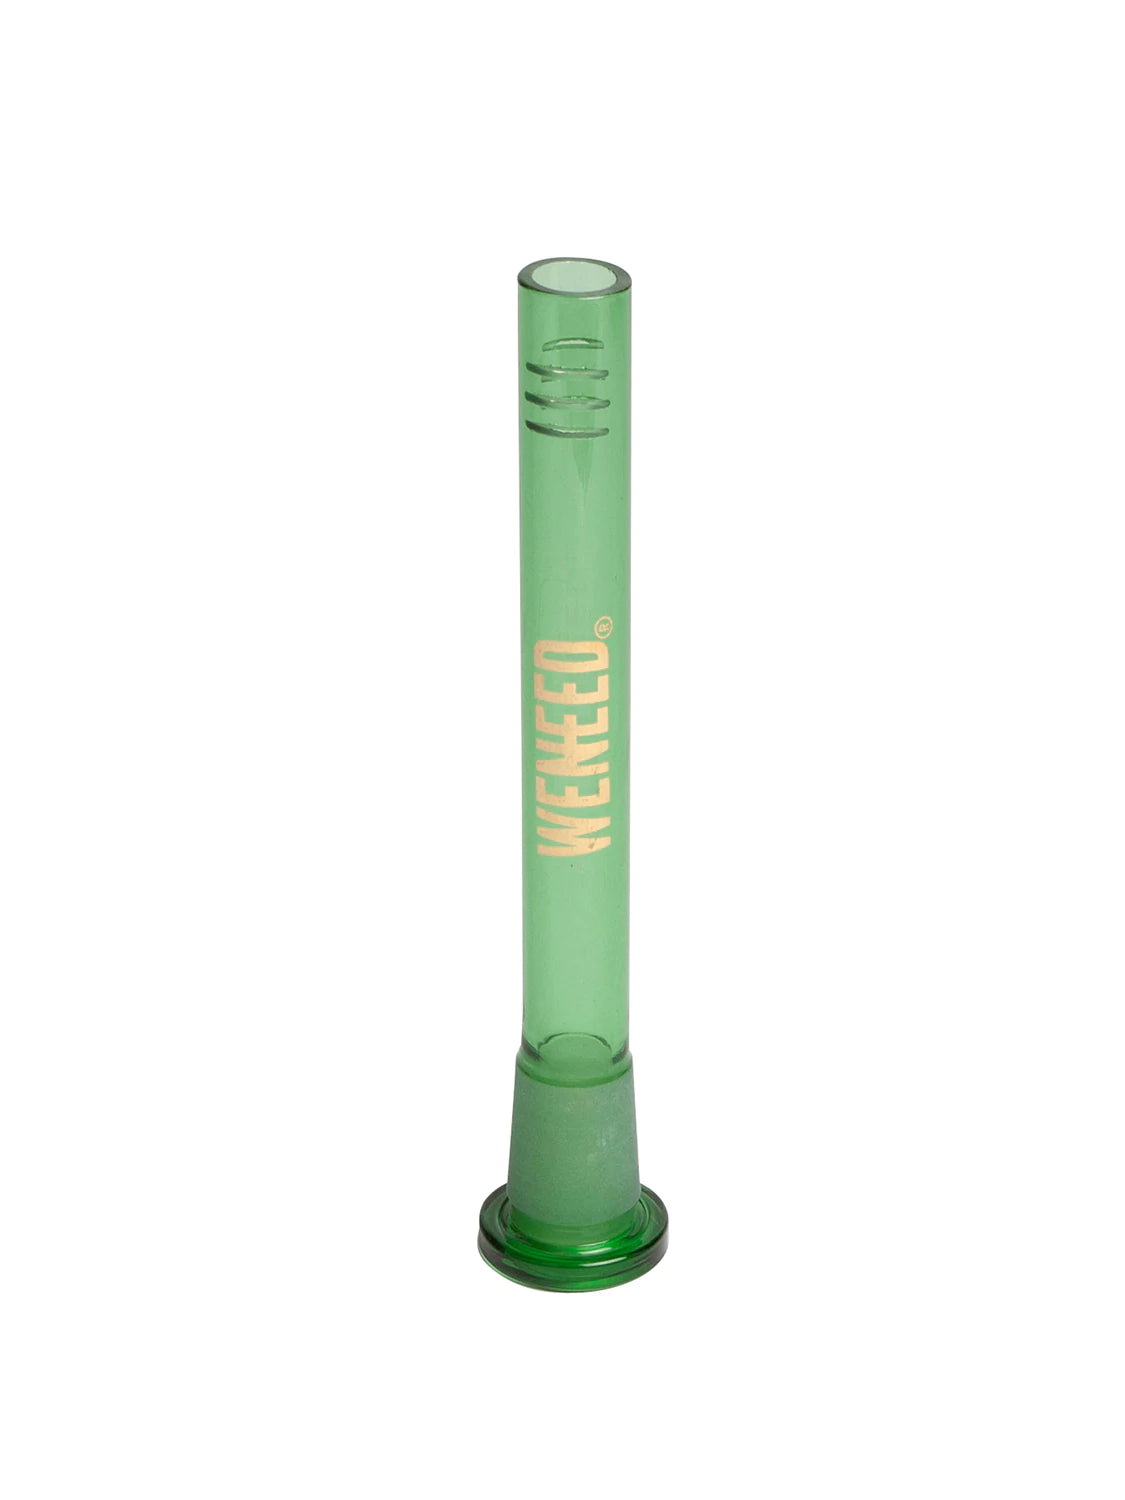 4.5 Classic Transparent Female Downstem - 18mm by 14mm